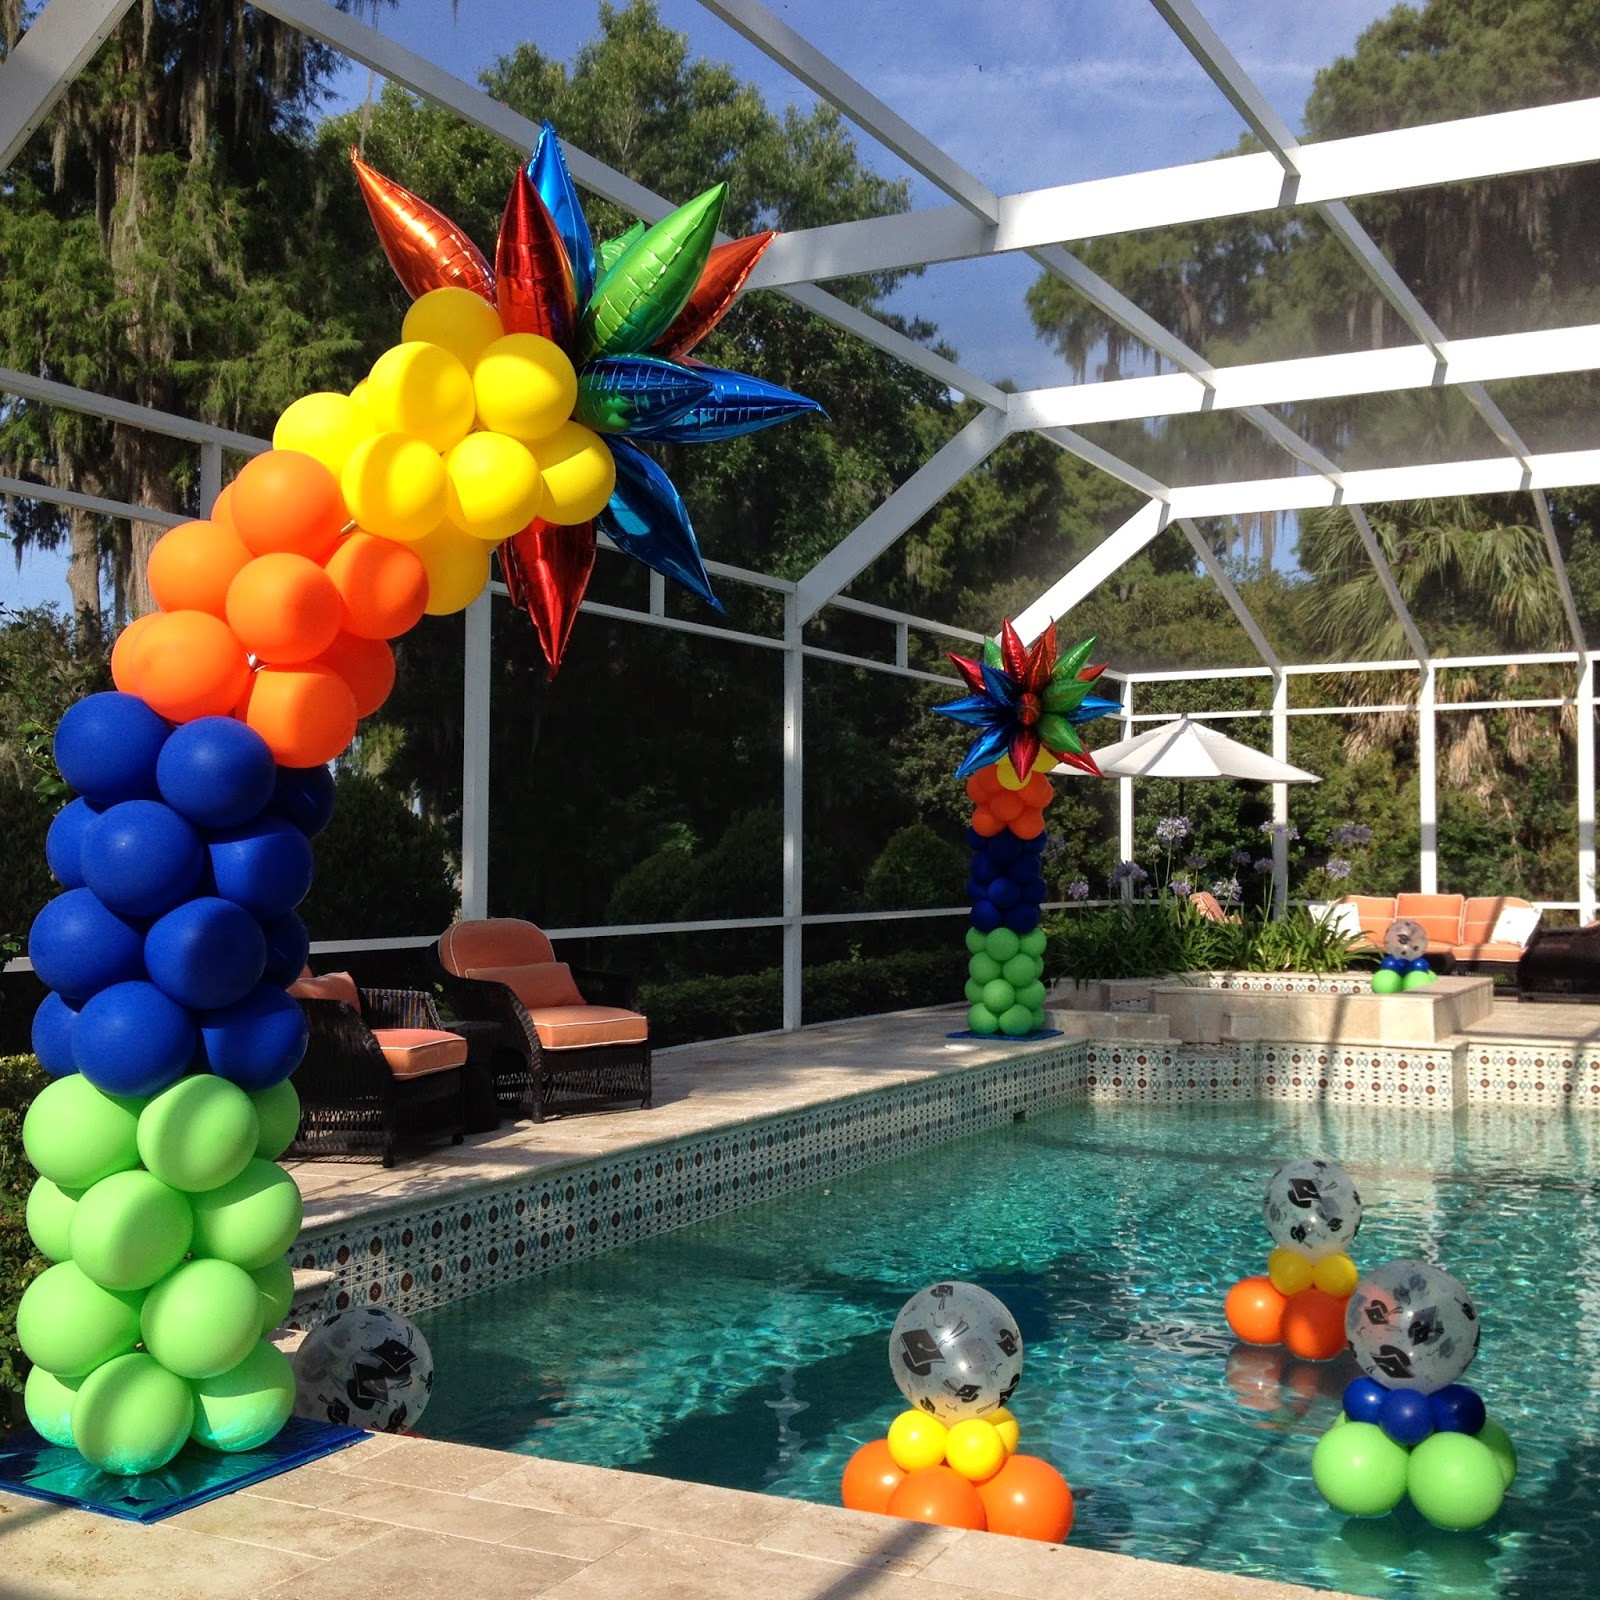 Pool Party Decoration Ideas
 Party People Event Decorating pany Colorful Graduation